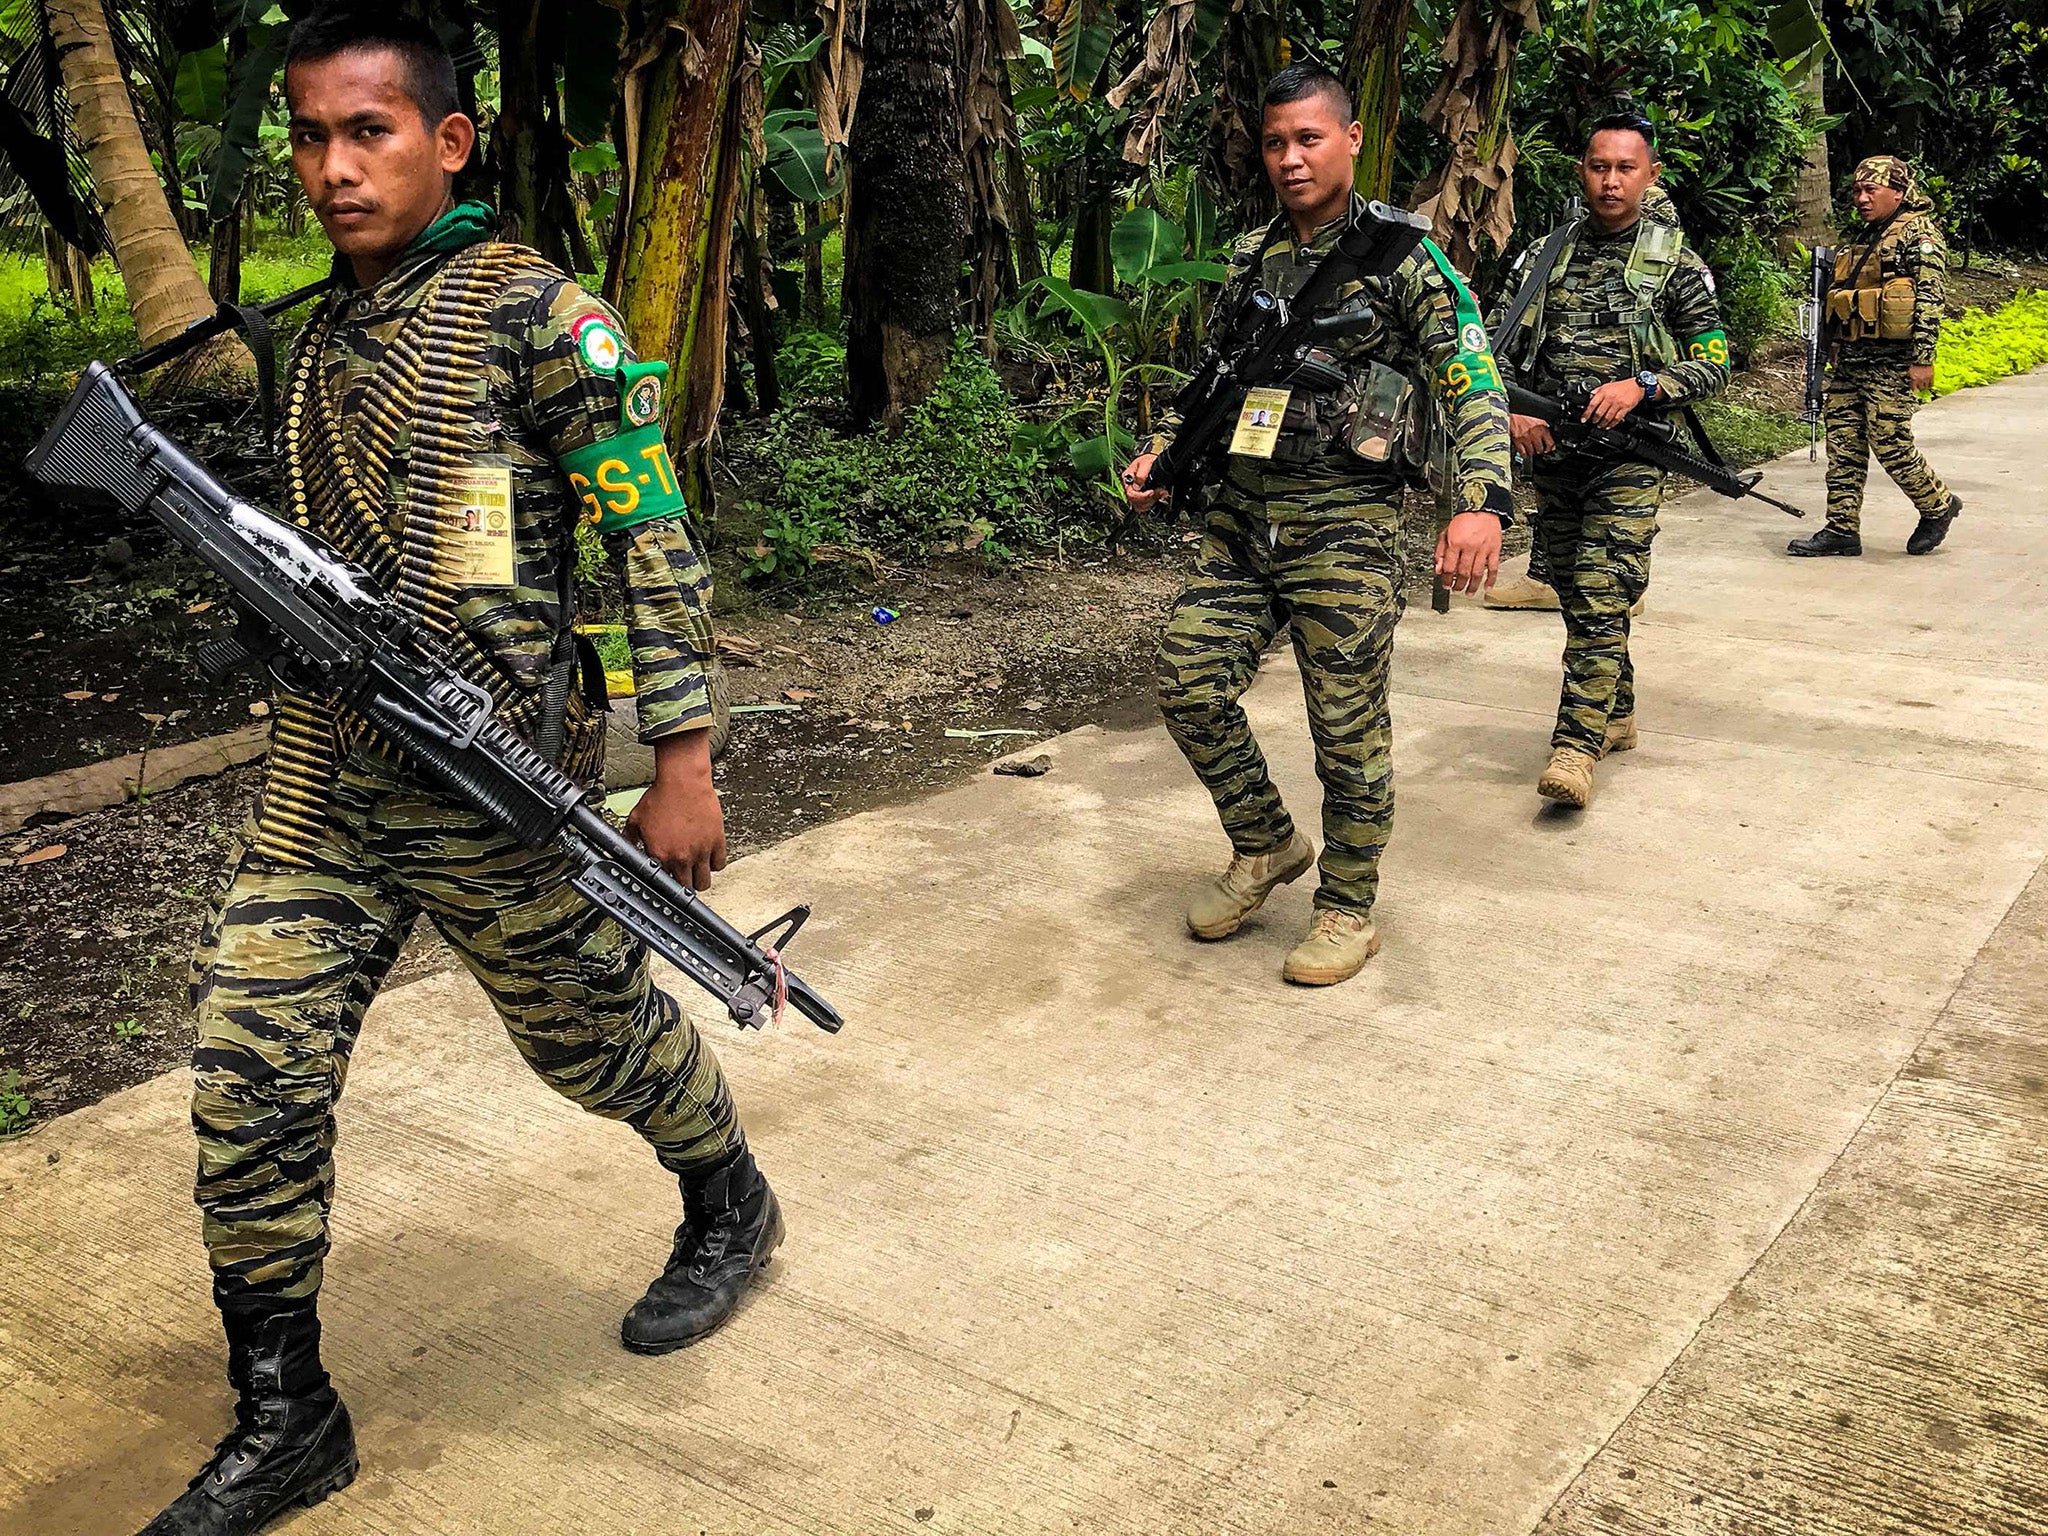 The Philippines' largest Muslim militant group, Moro Islamic Liberation Front, is currently fighting a splinter faction that has pledged allegiance to Isis